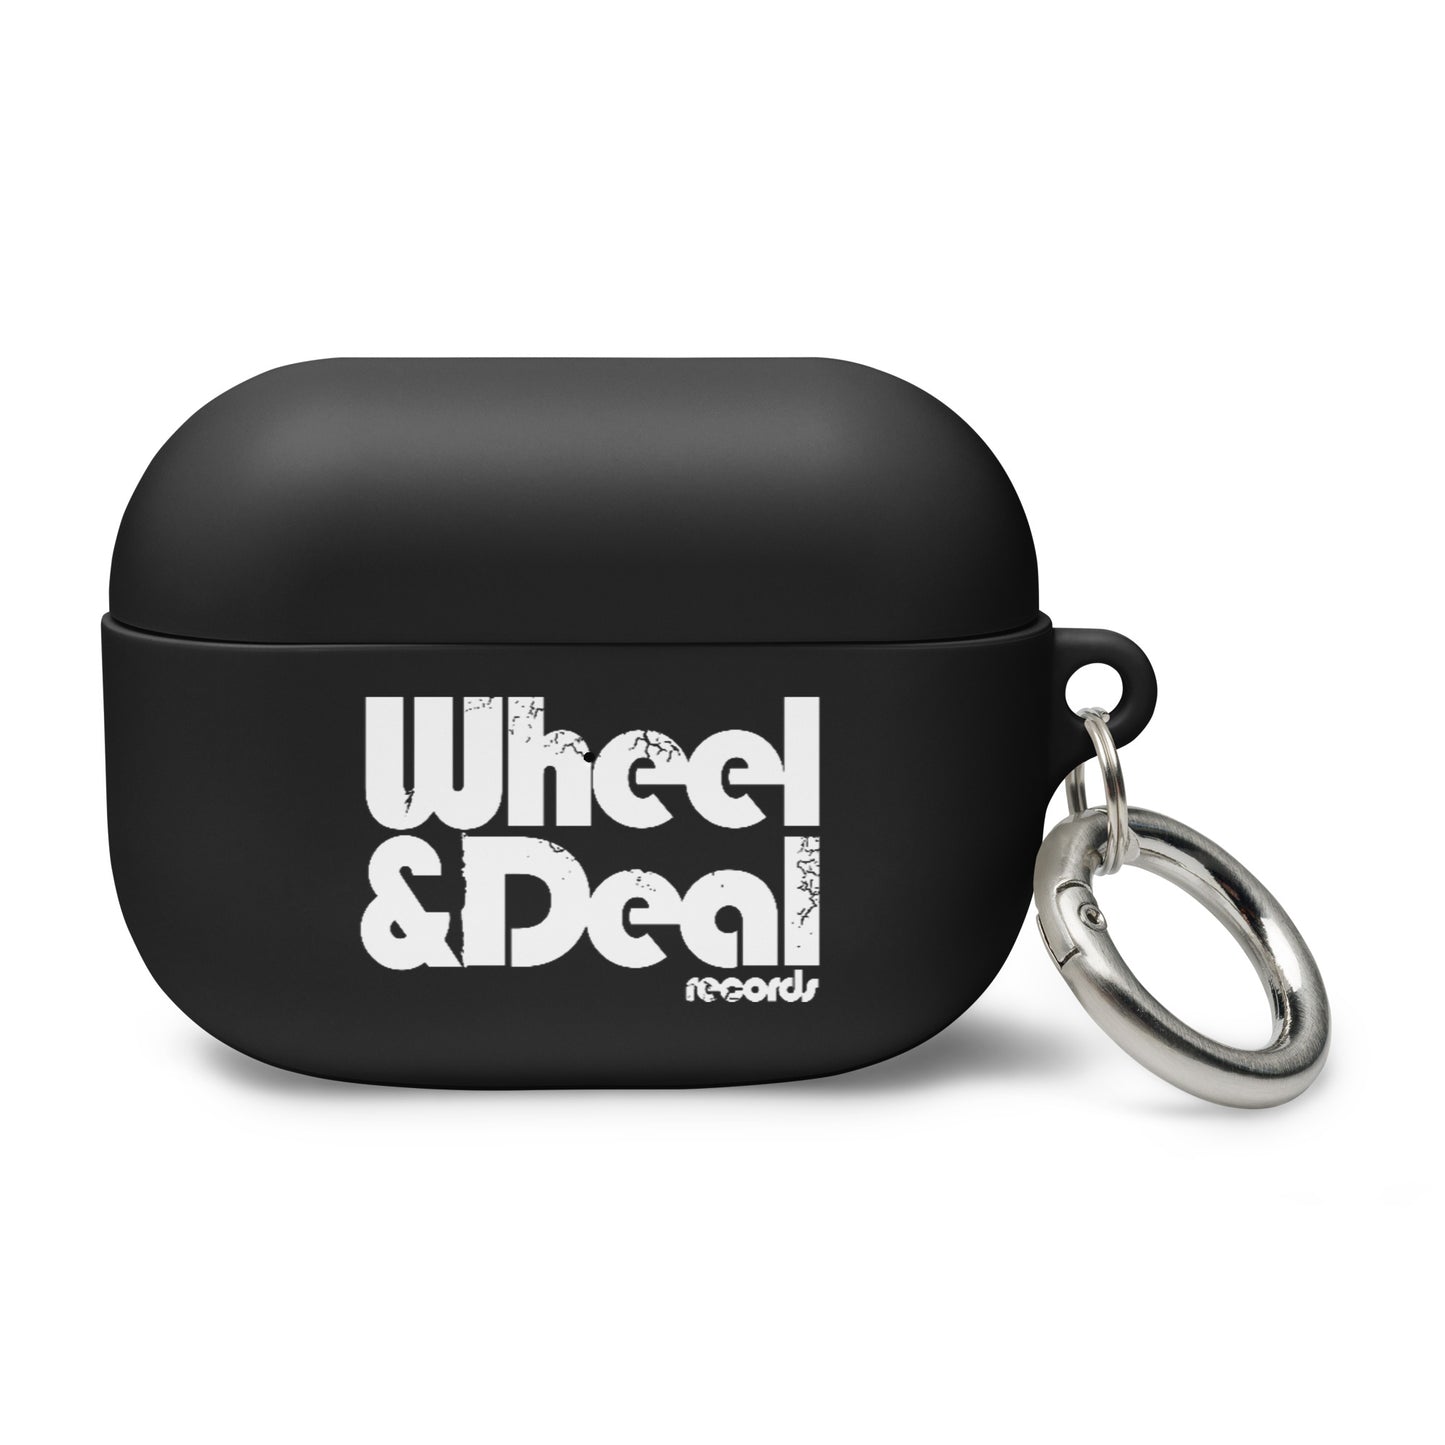 Wheel & Deal Rubber Case for AirPods®